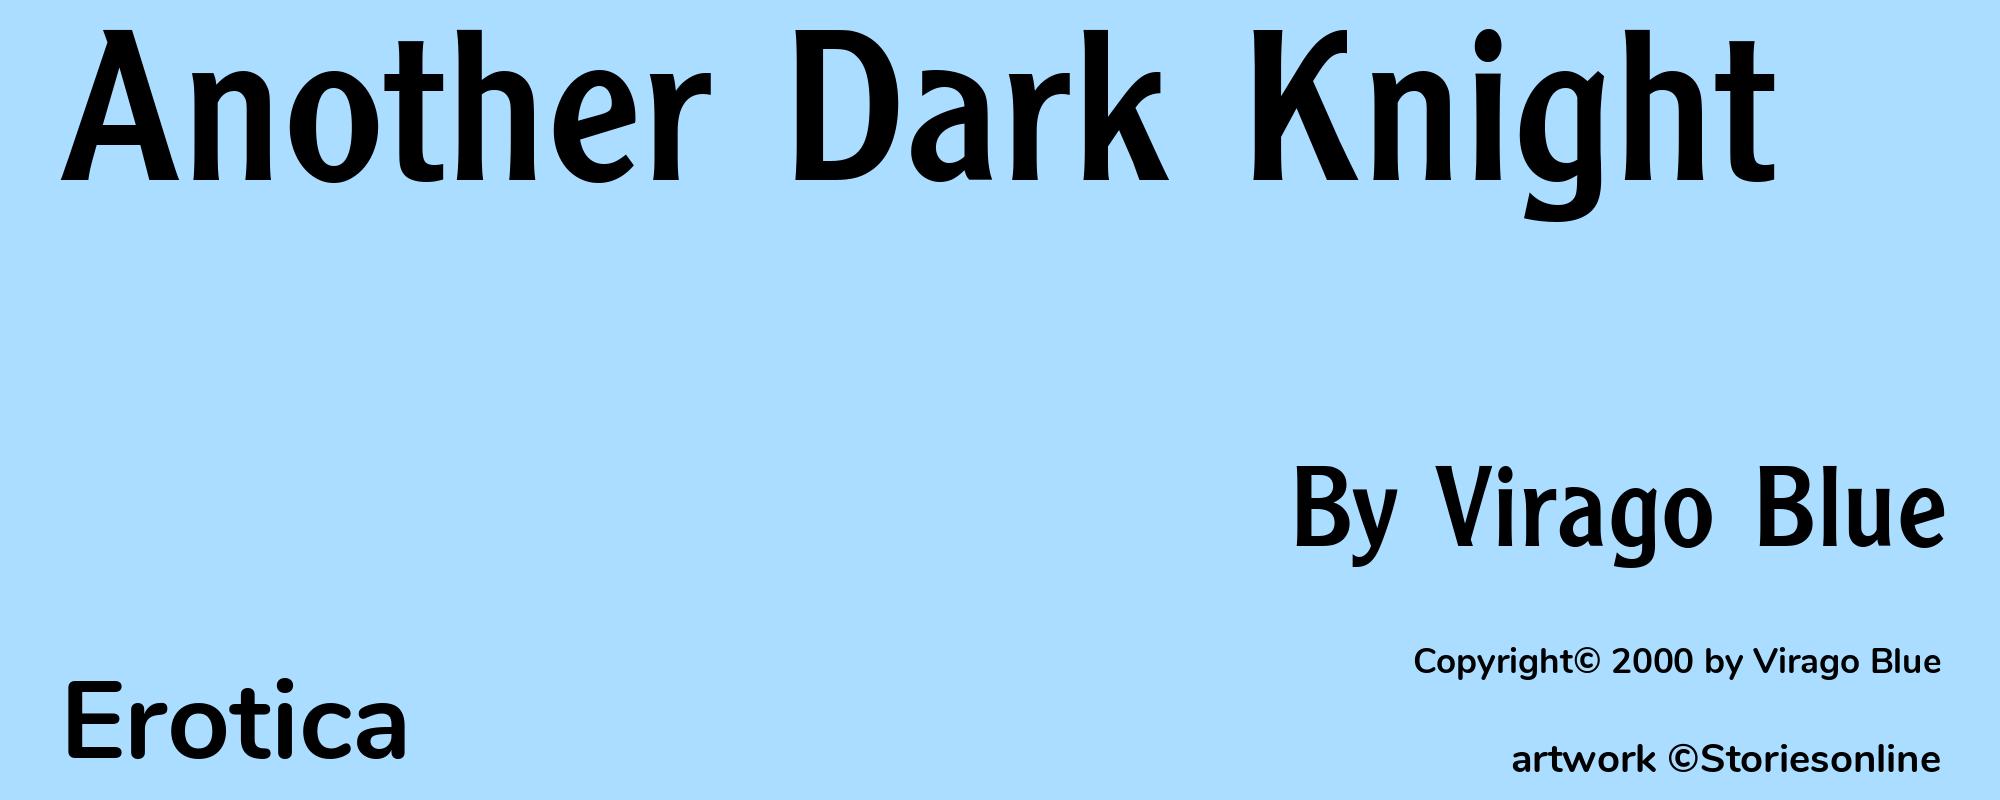 Another Dark Knight - Cover